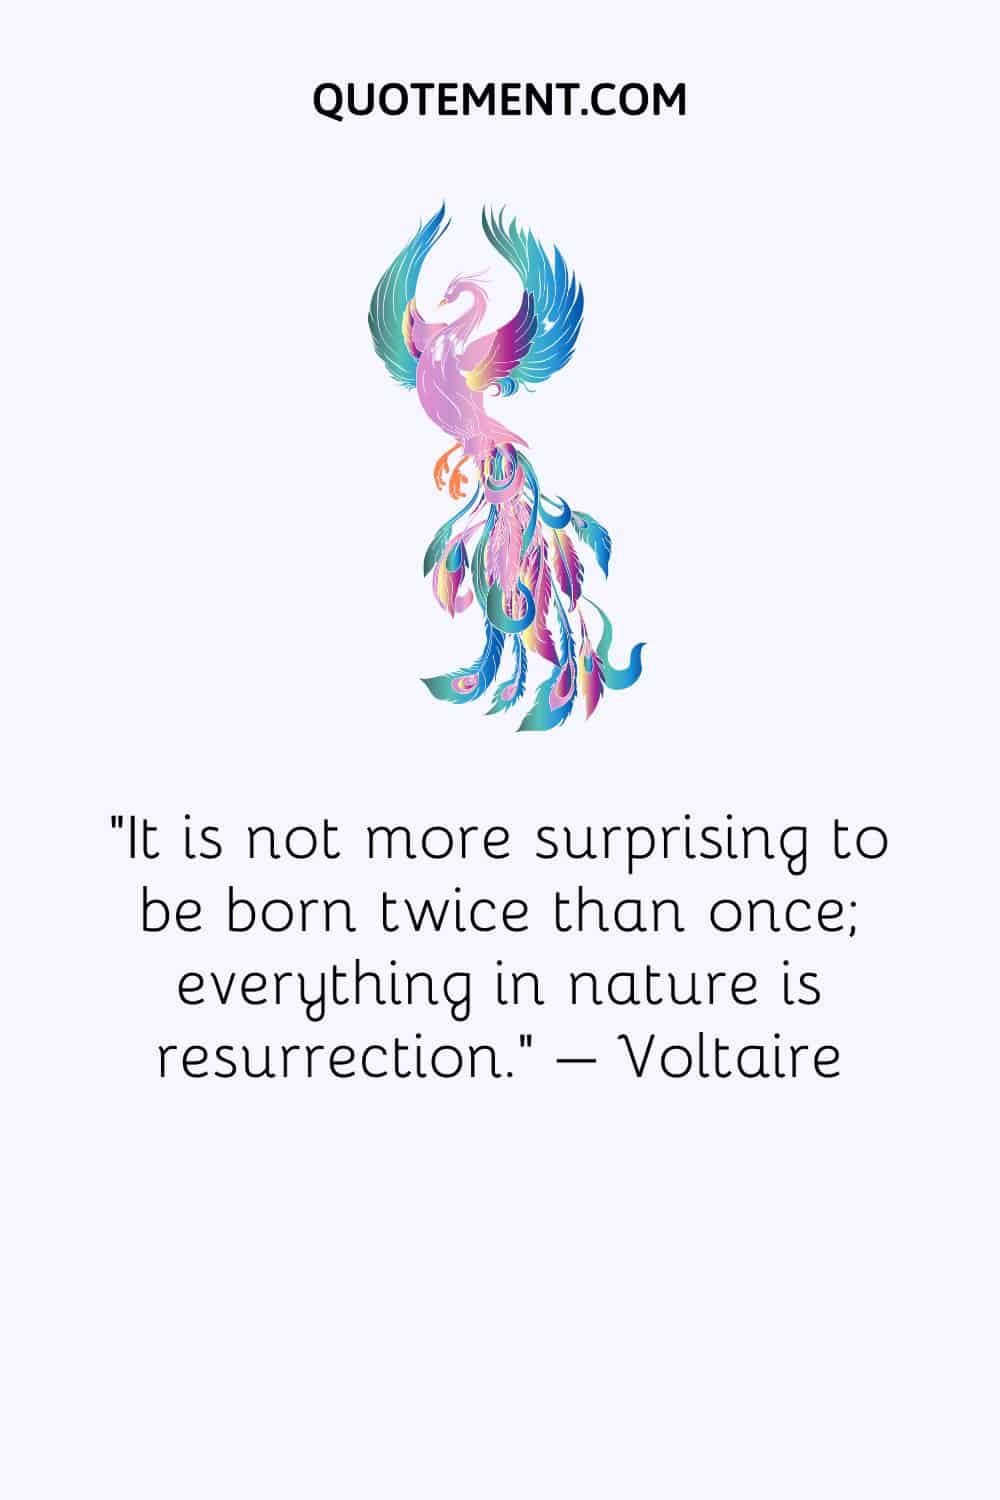 It is not more surprising to be born twice than once; everything in nature is resurrection